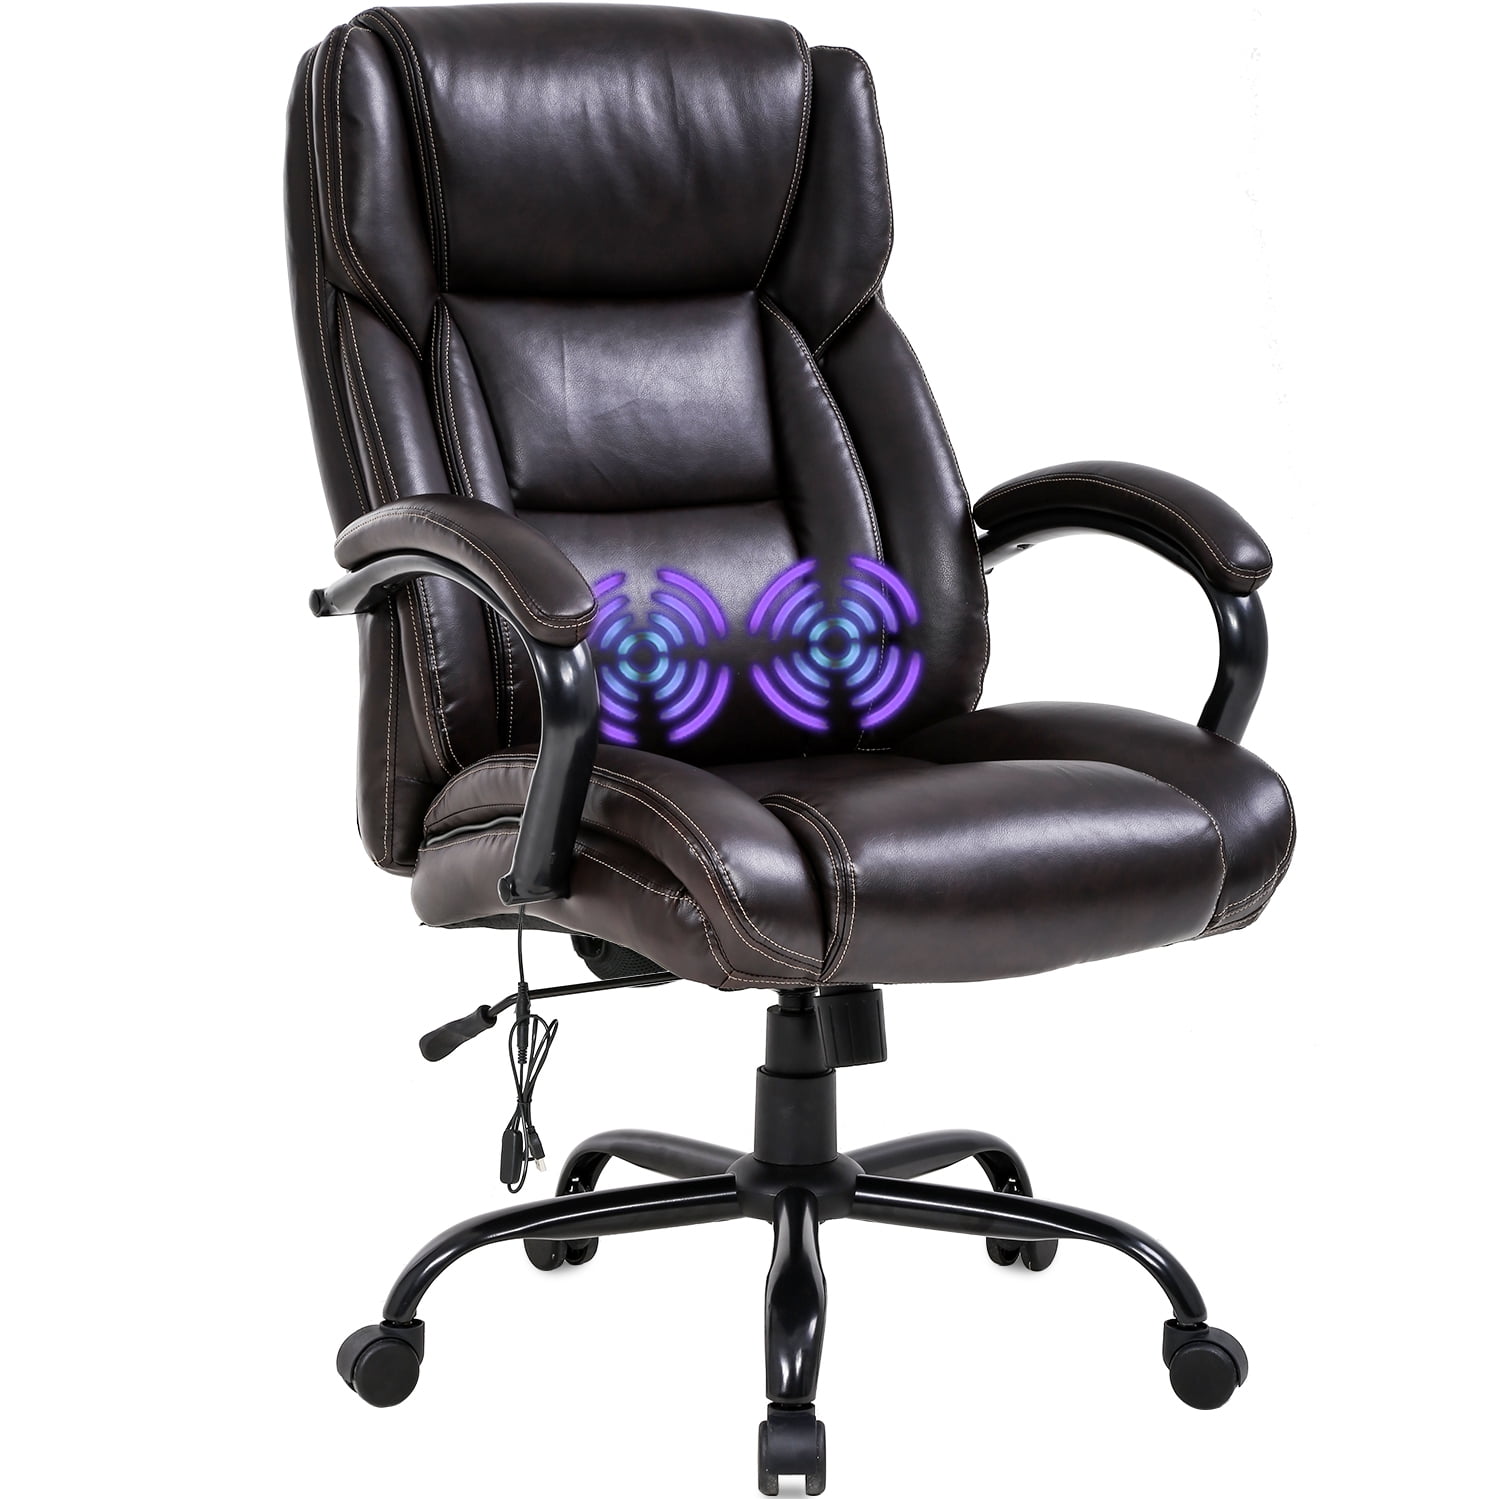 Details about   Vinsetto Office Computer Swivel Chair w/ Massage Cushion & Adjustable Seat 